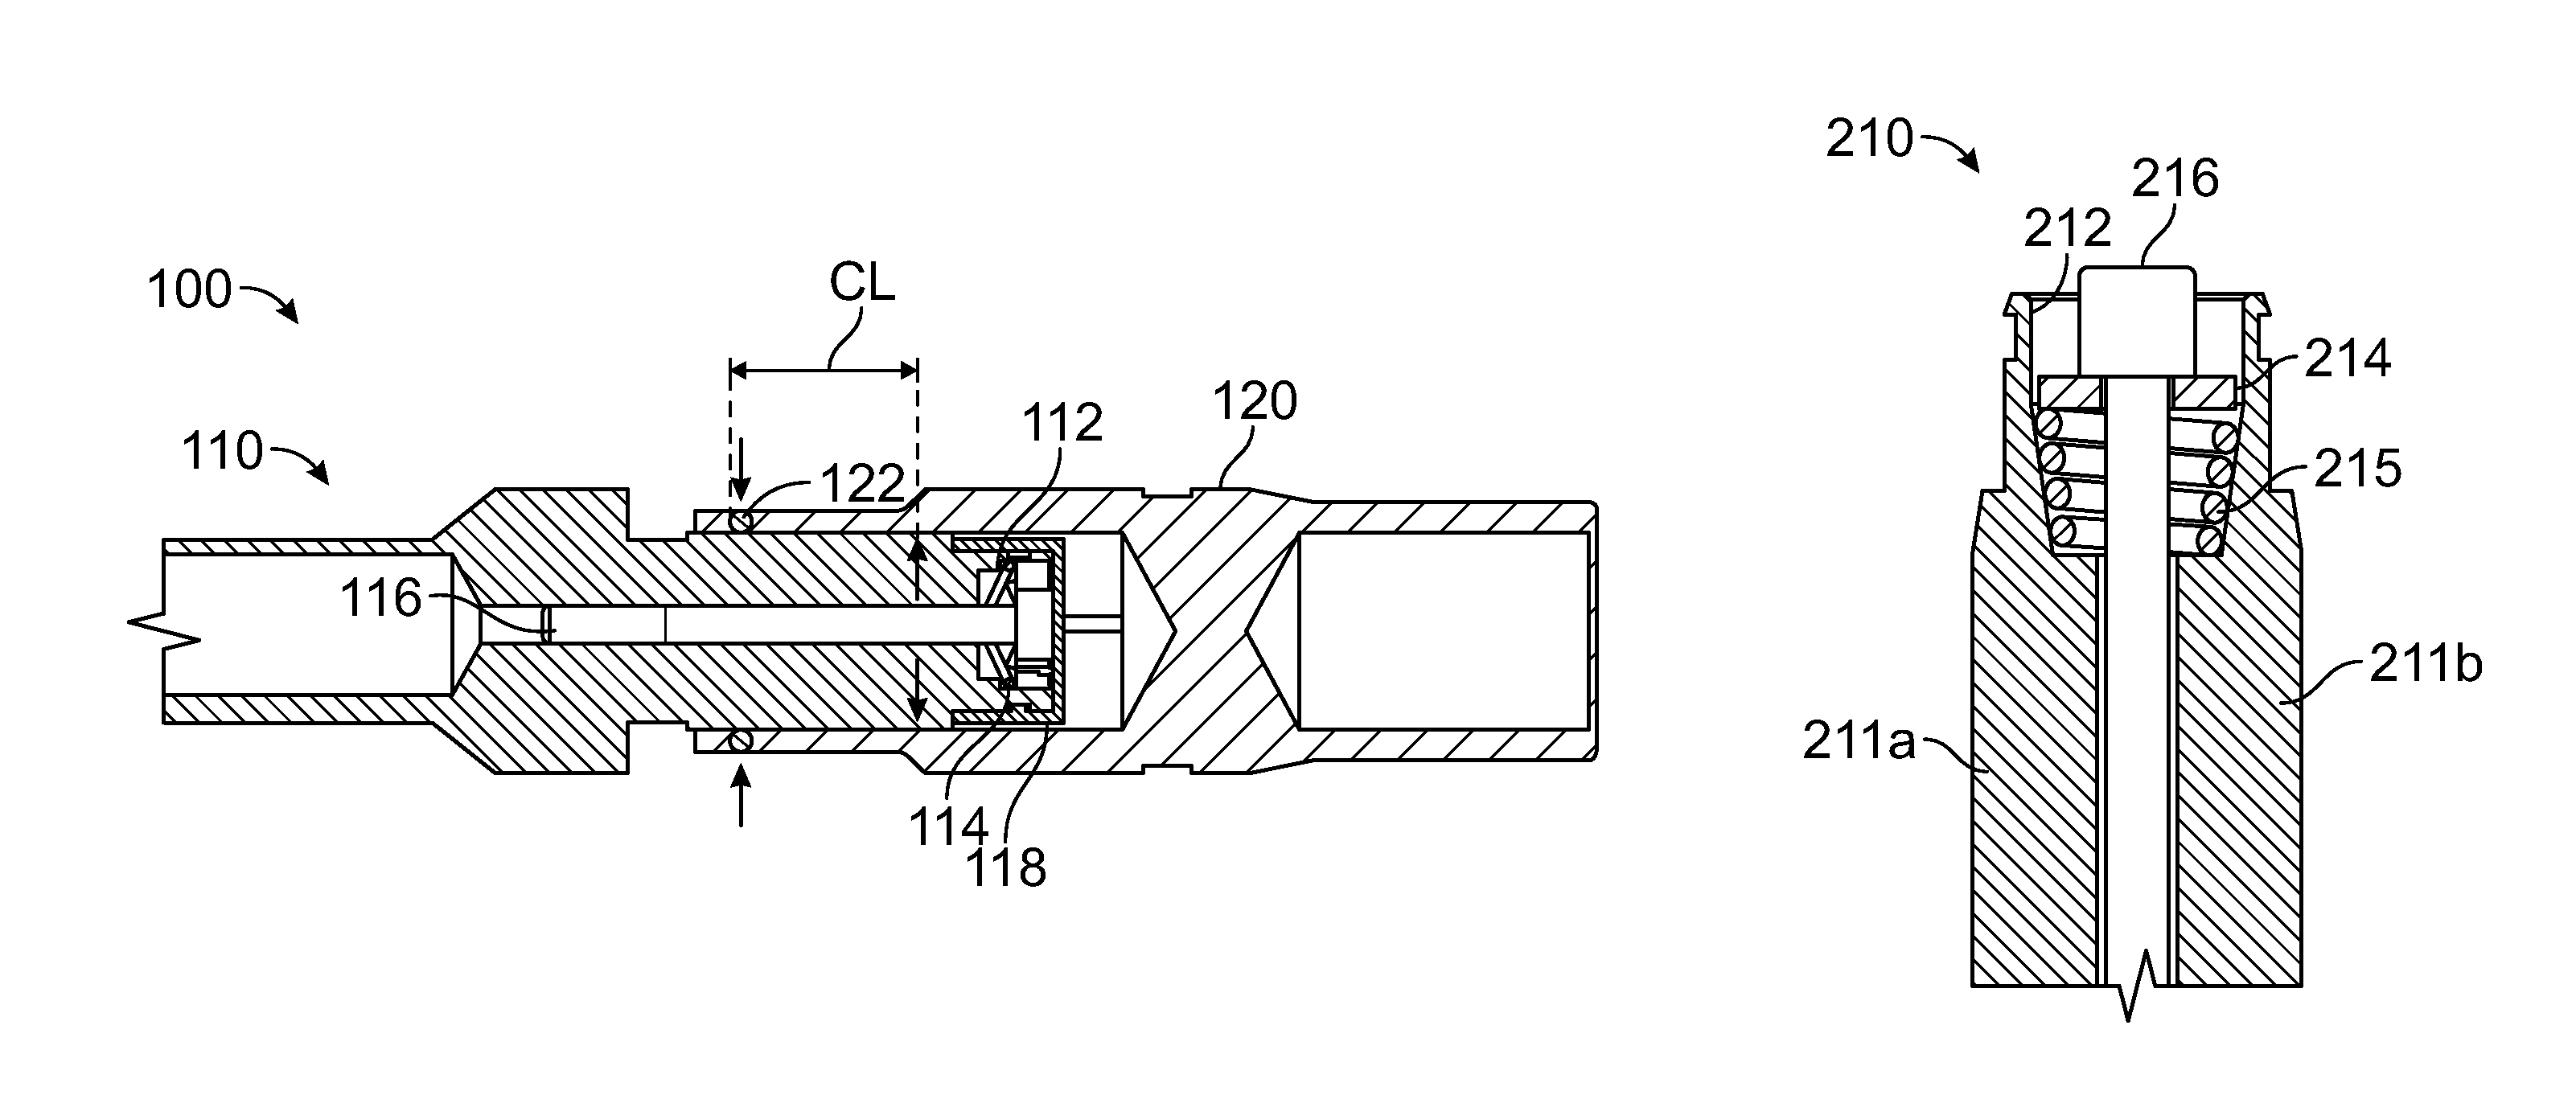 Connector assembly having self-adjusting male and female connector elements